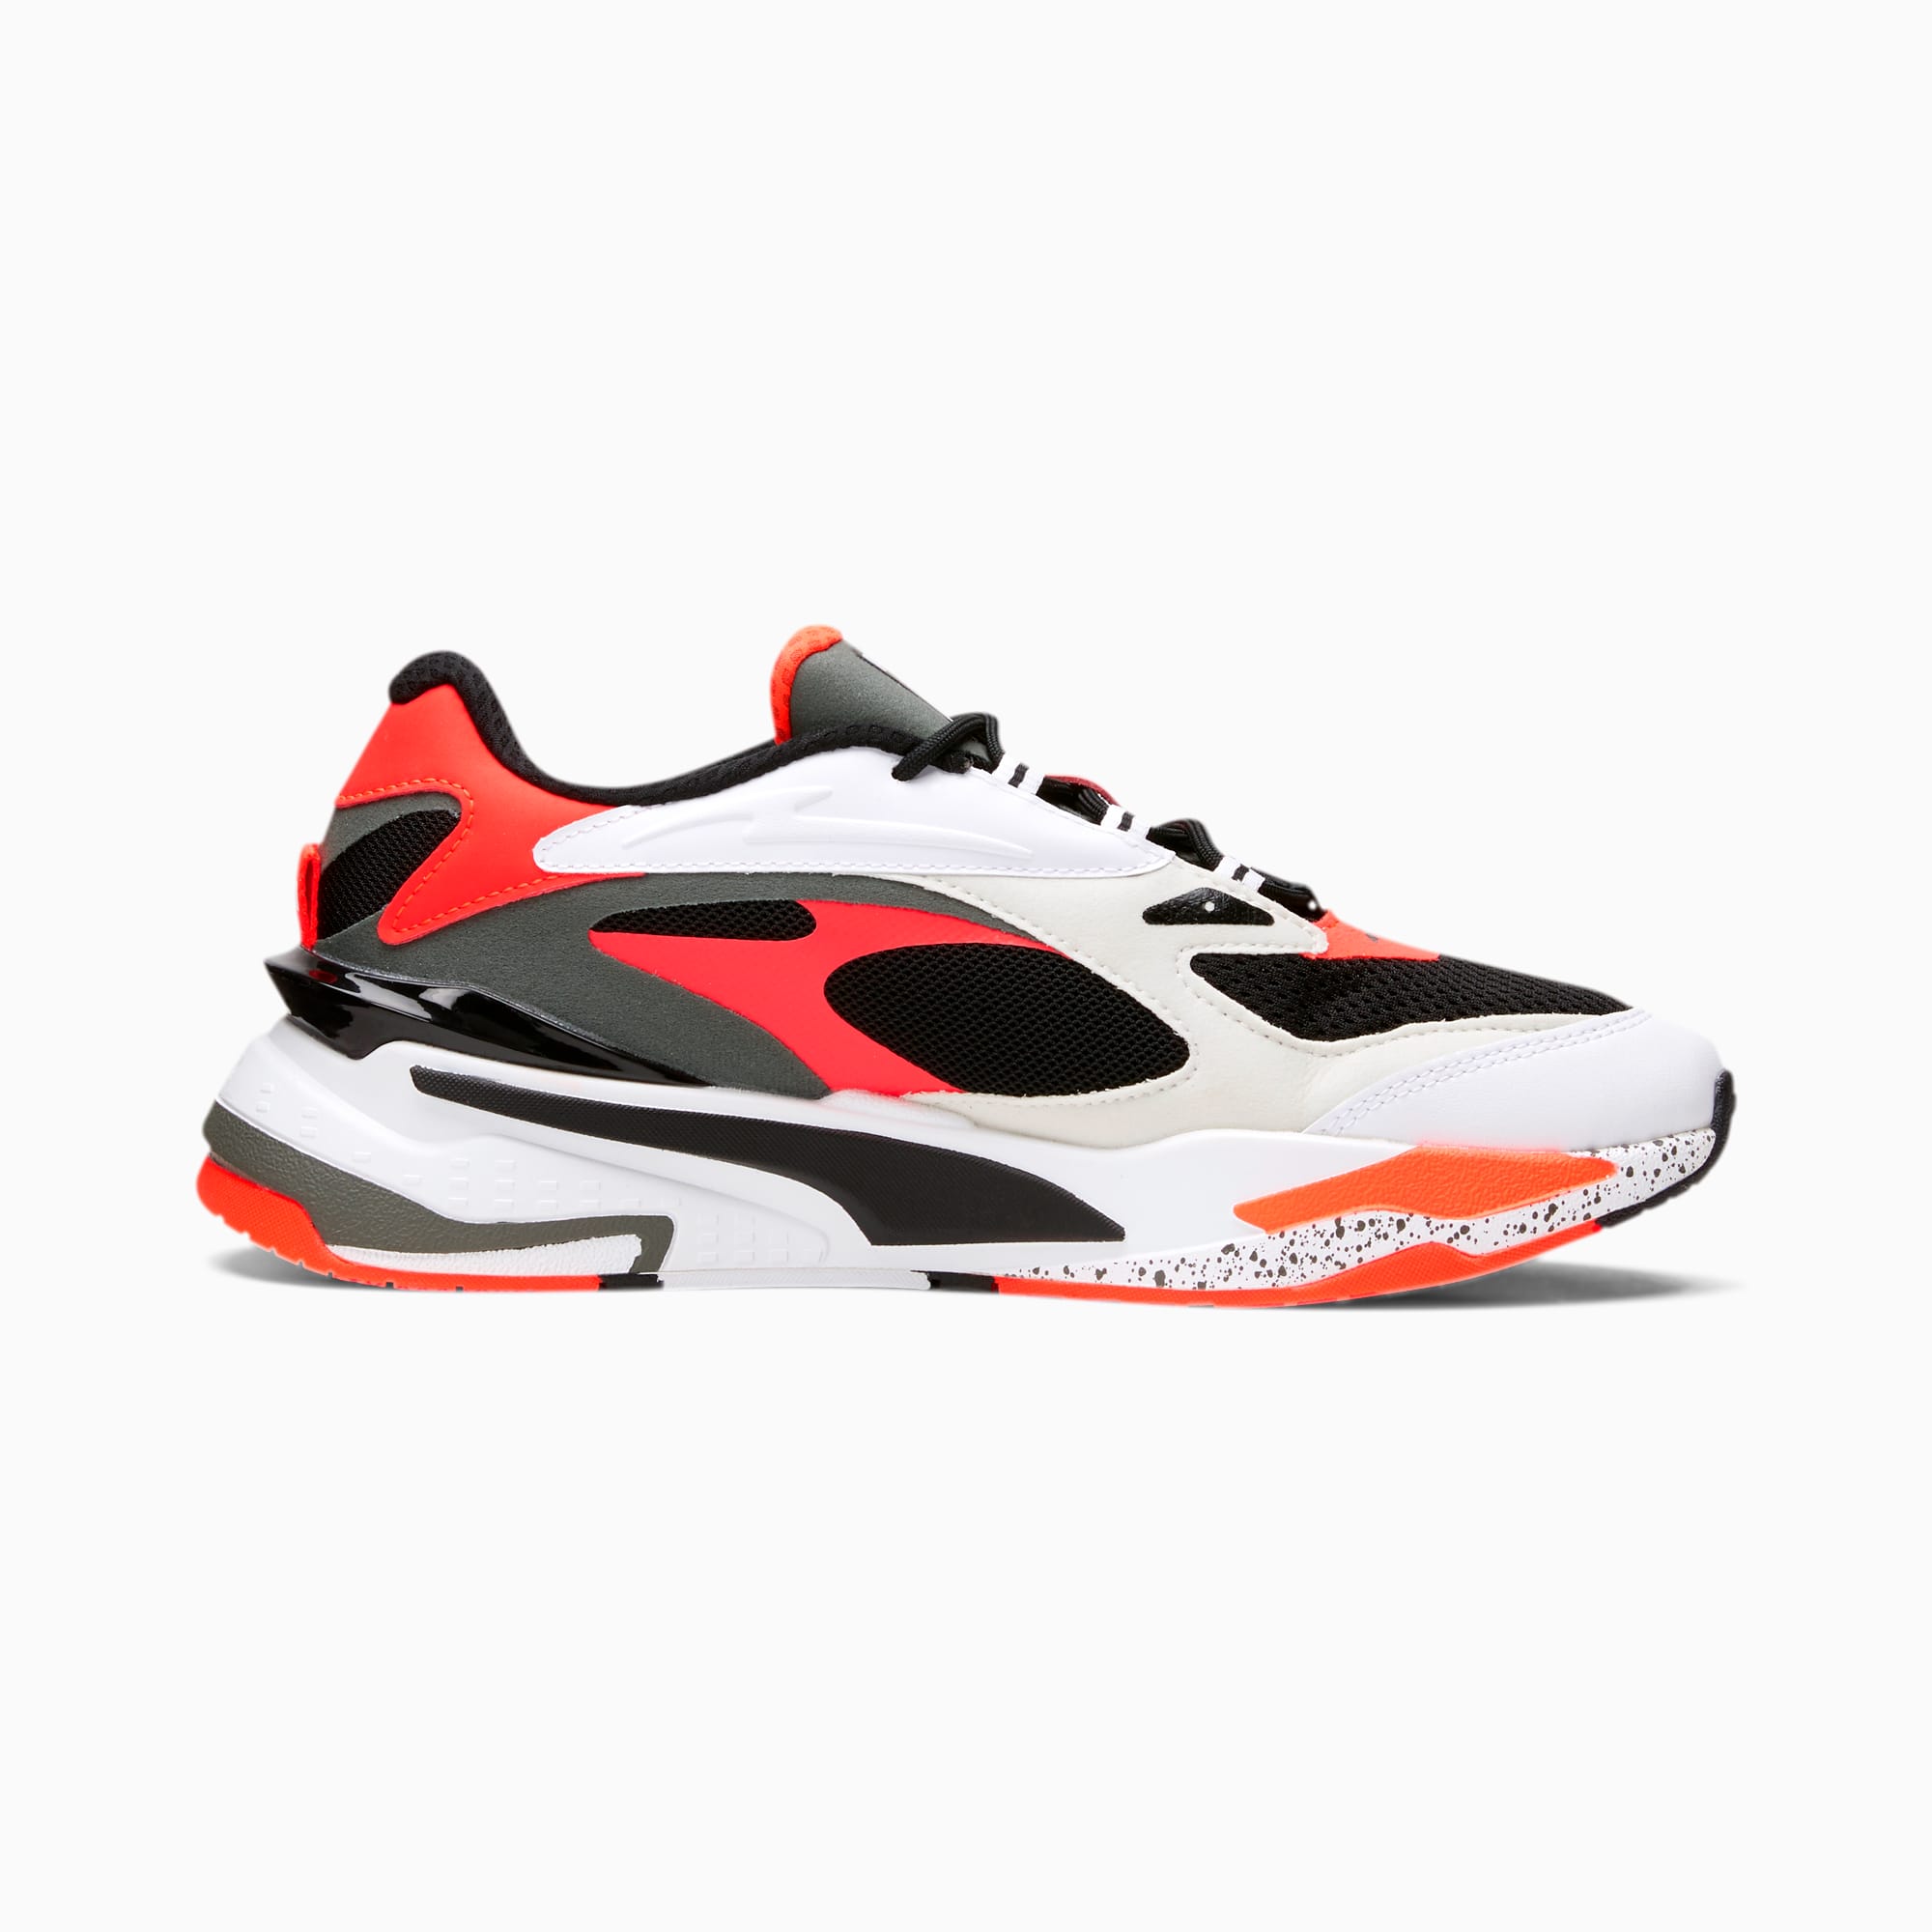 Humanista Leer Imposible RS-Fast Sneakers | PUMA